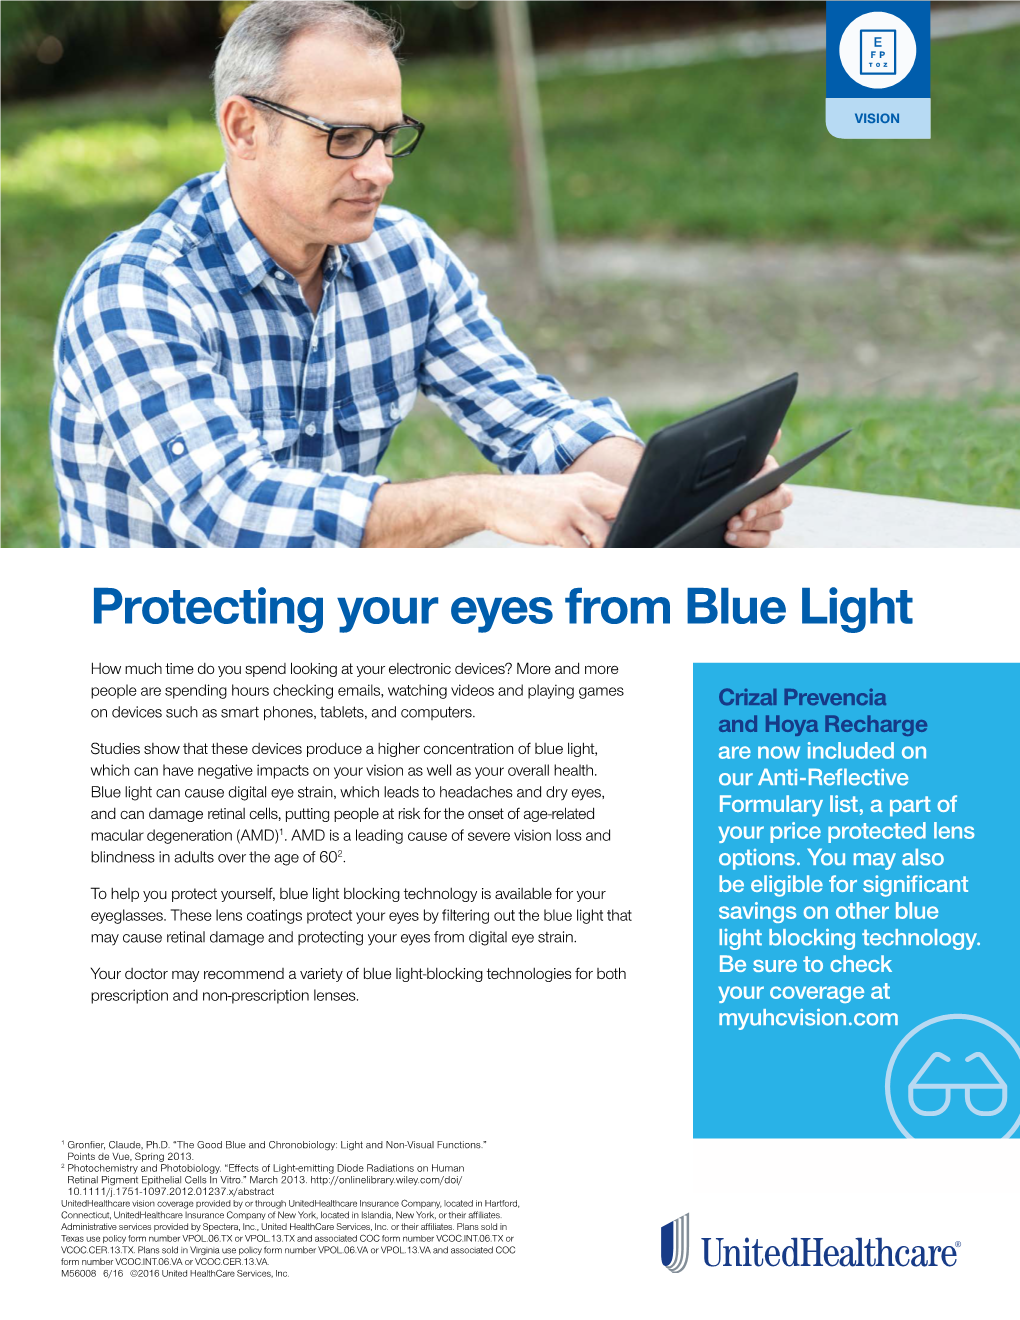 Protecting Your Eyes from Blue Light